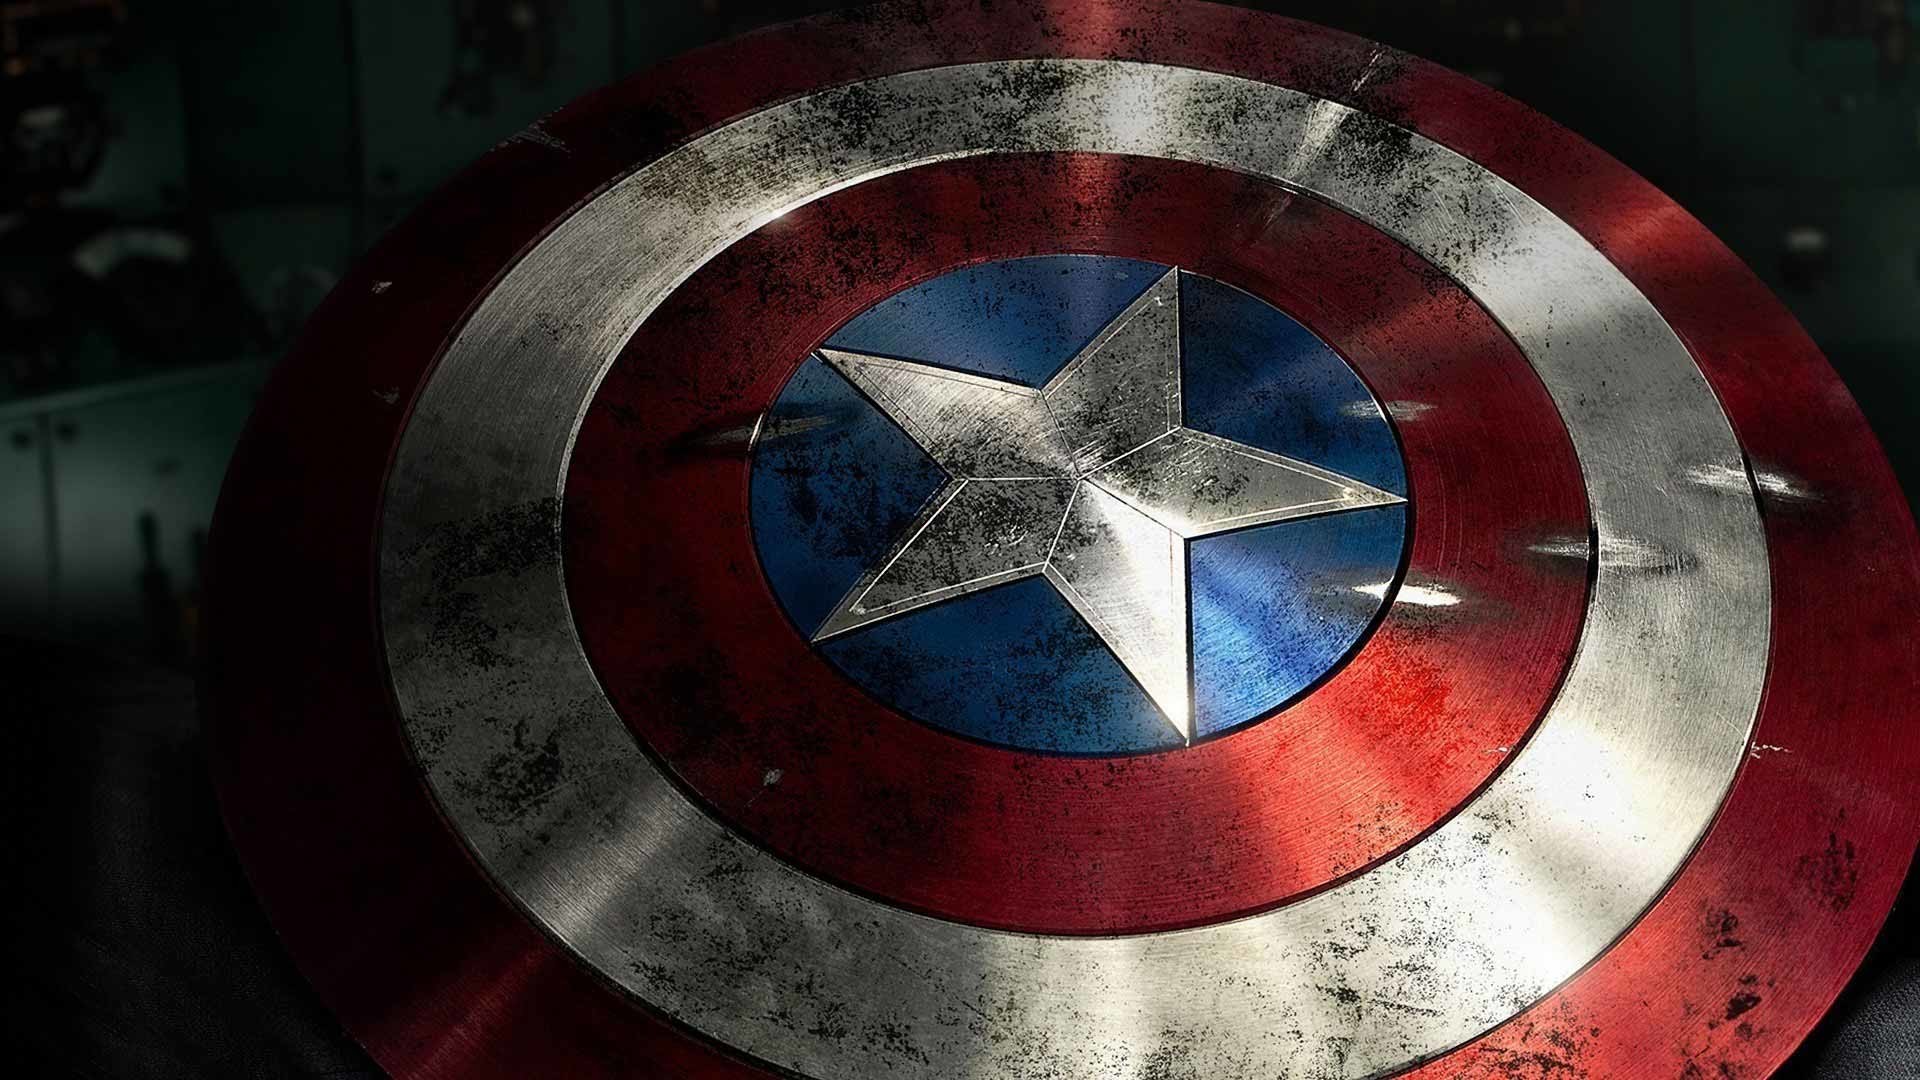 Captain America Shield Wallpapers 69 images